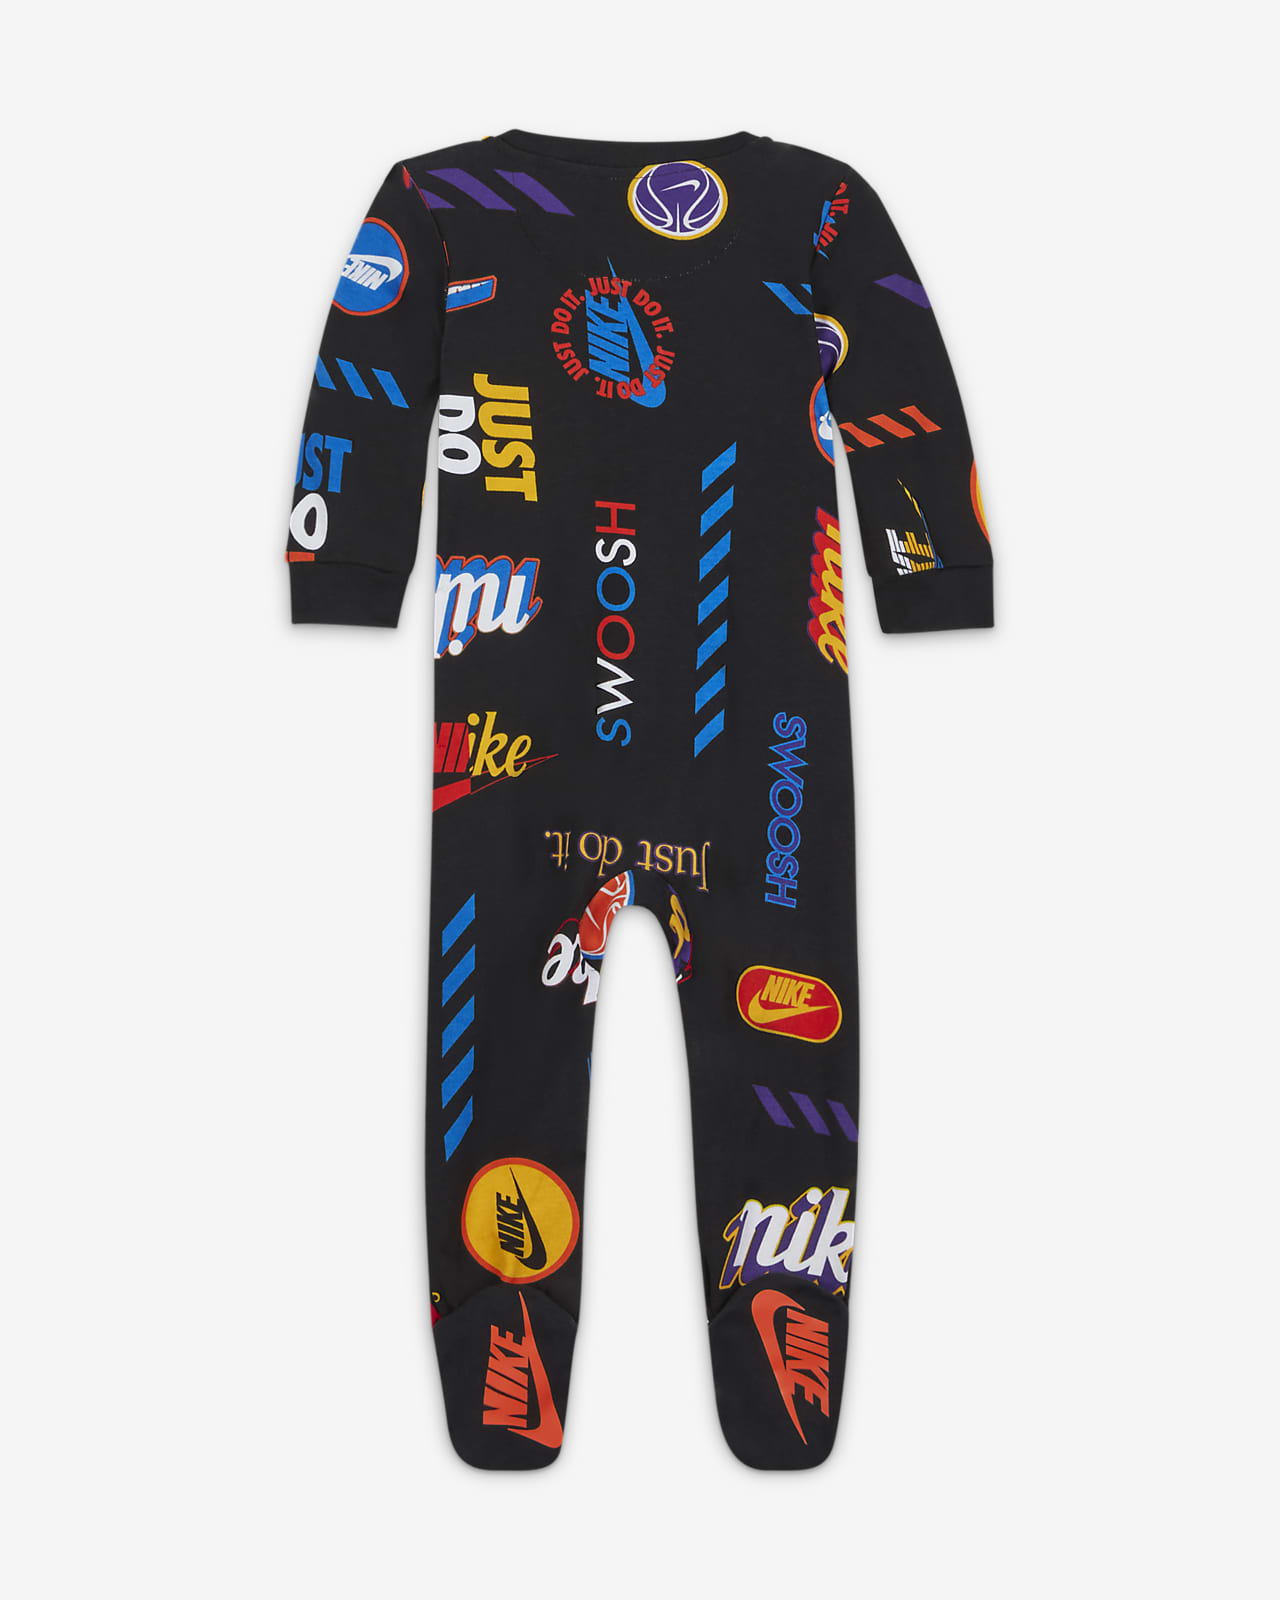 Nike Baby (0-9M) Footed Full-Zip Coverall. | Strampler